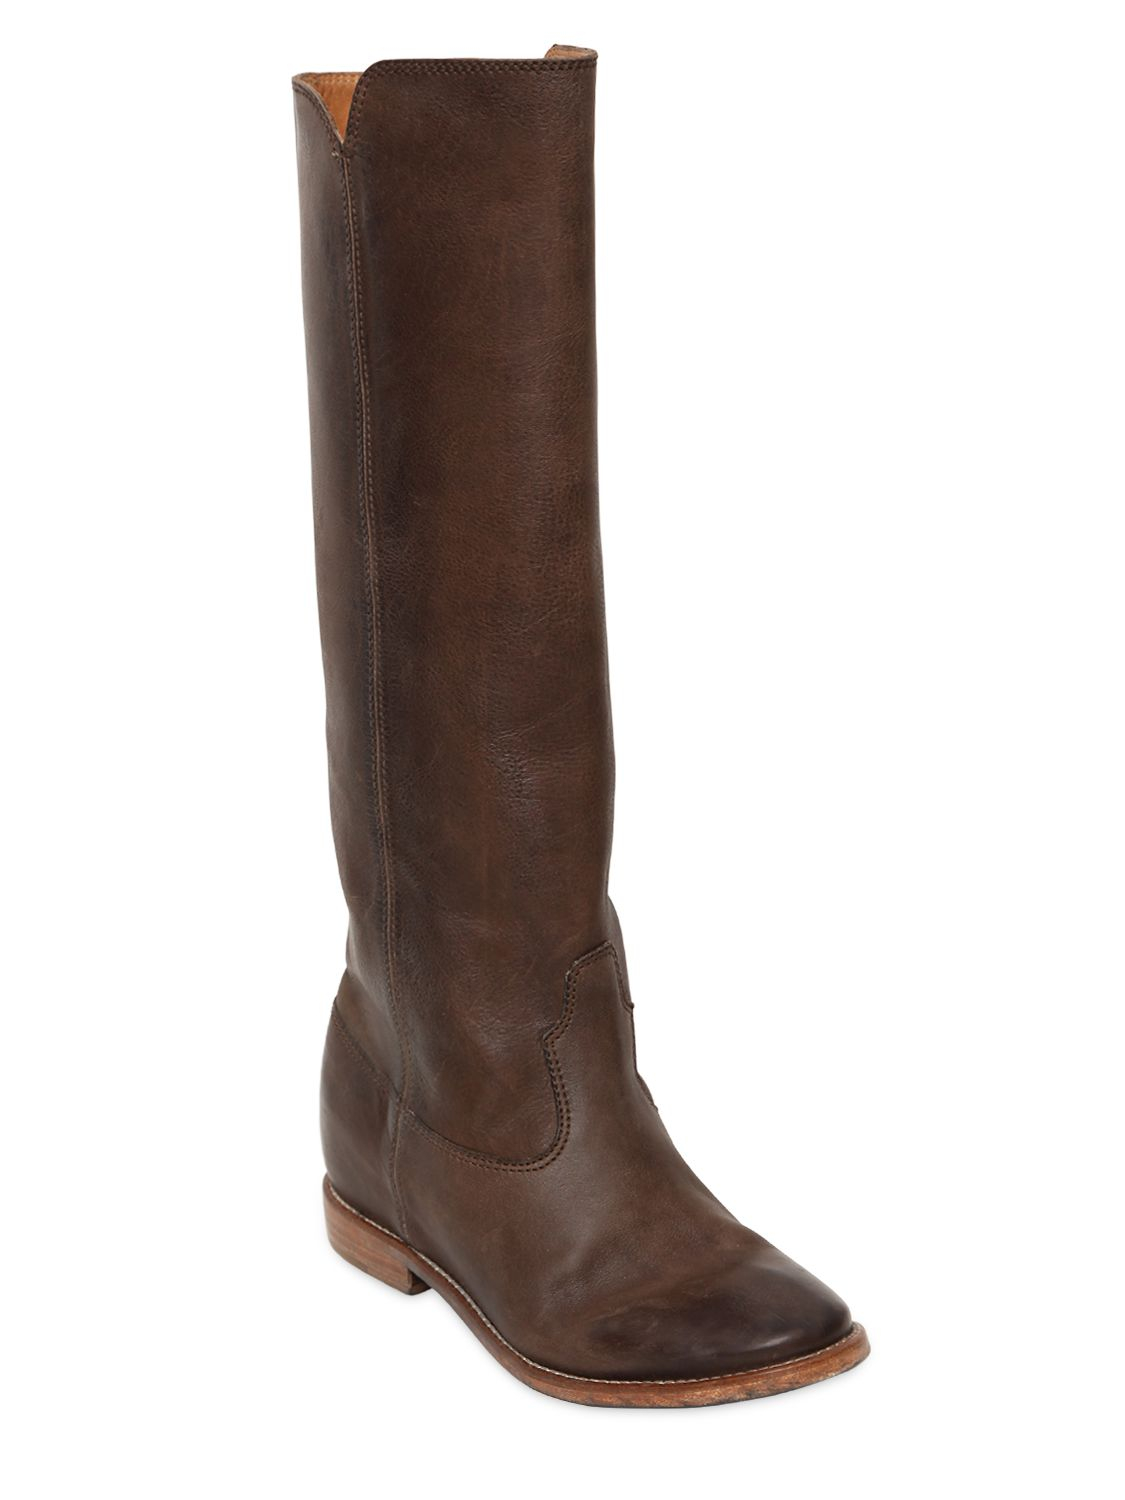 Isabel Marant Etoile Chess Boots in Brown -